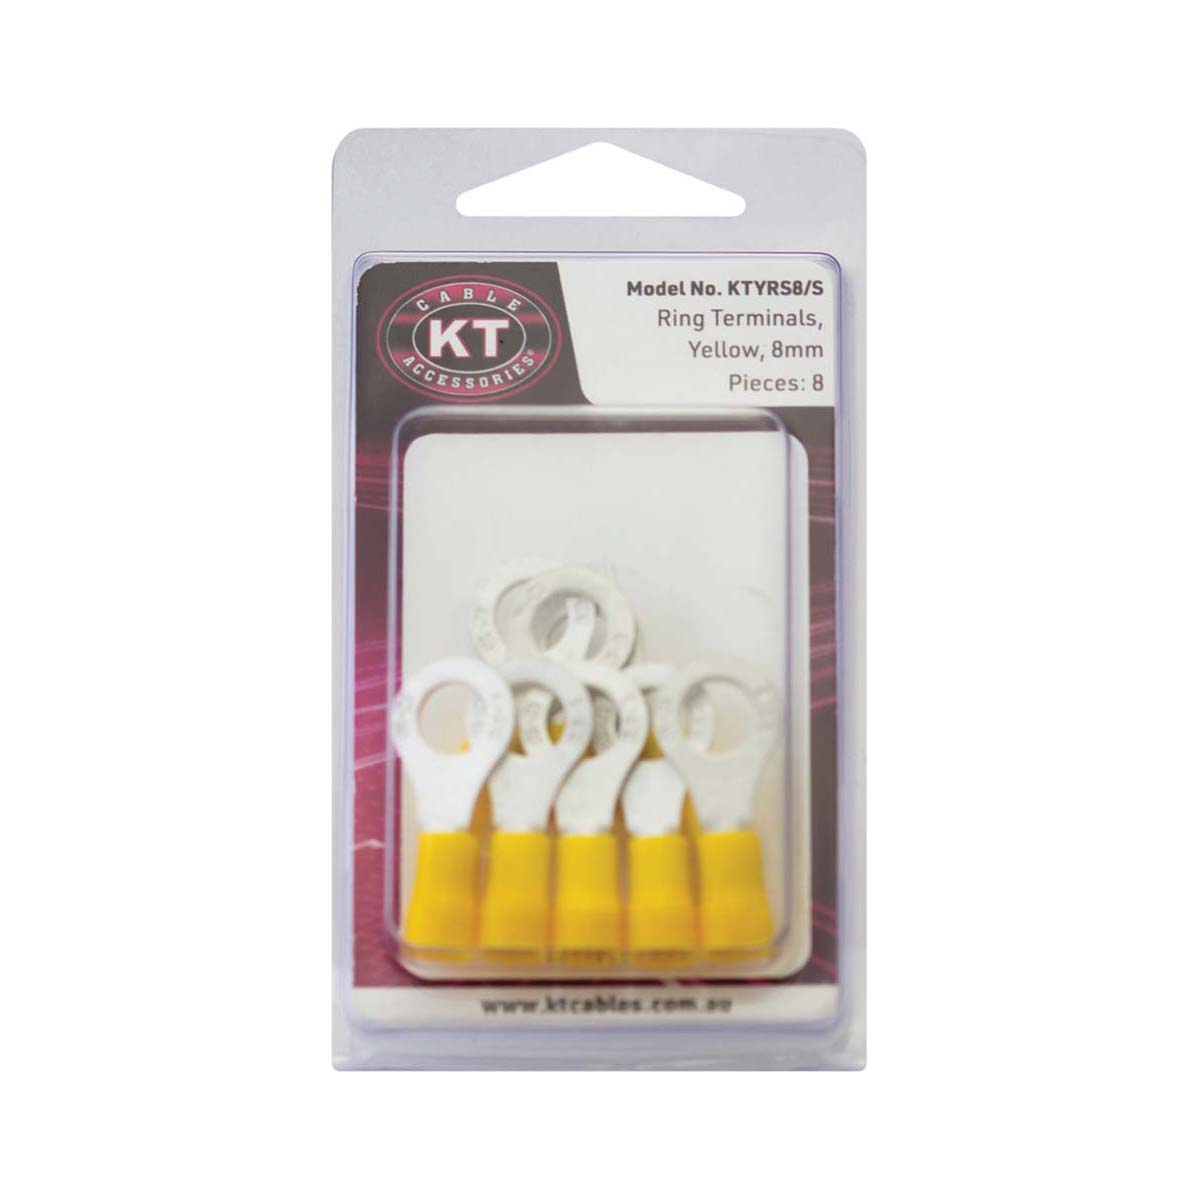 KT Cables Insulated Ring Terminal Yellow 6.0 8mm